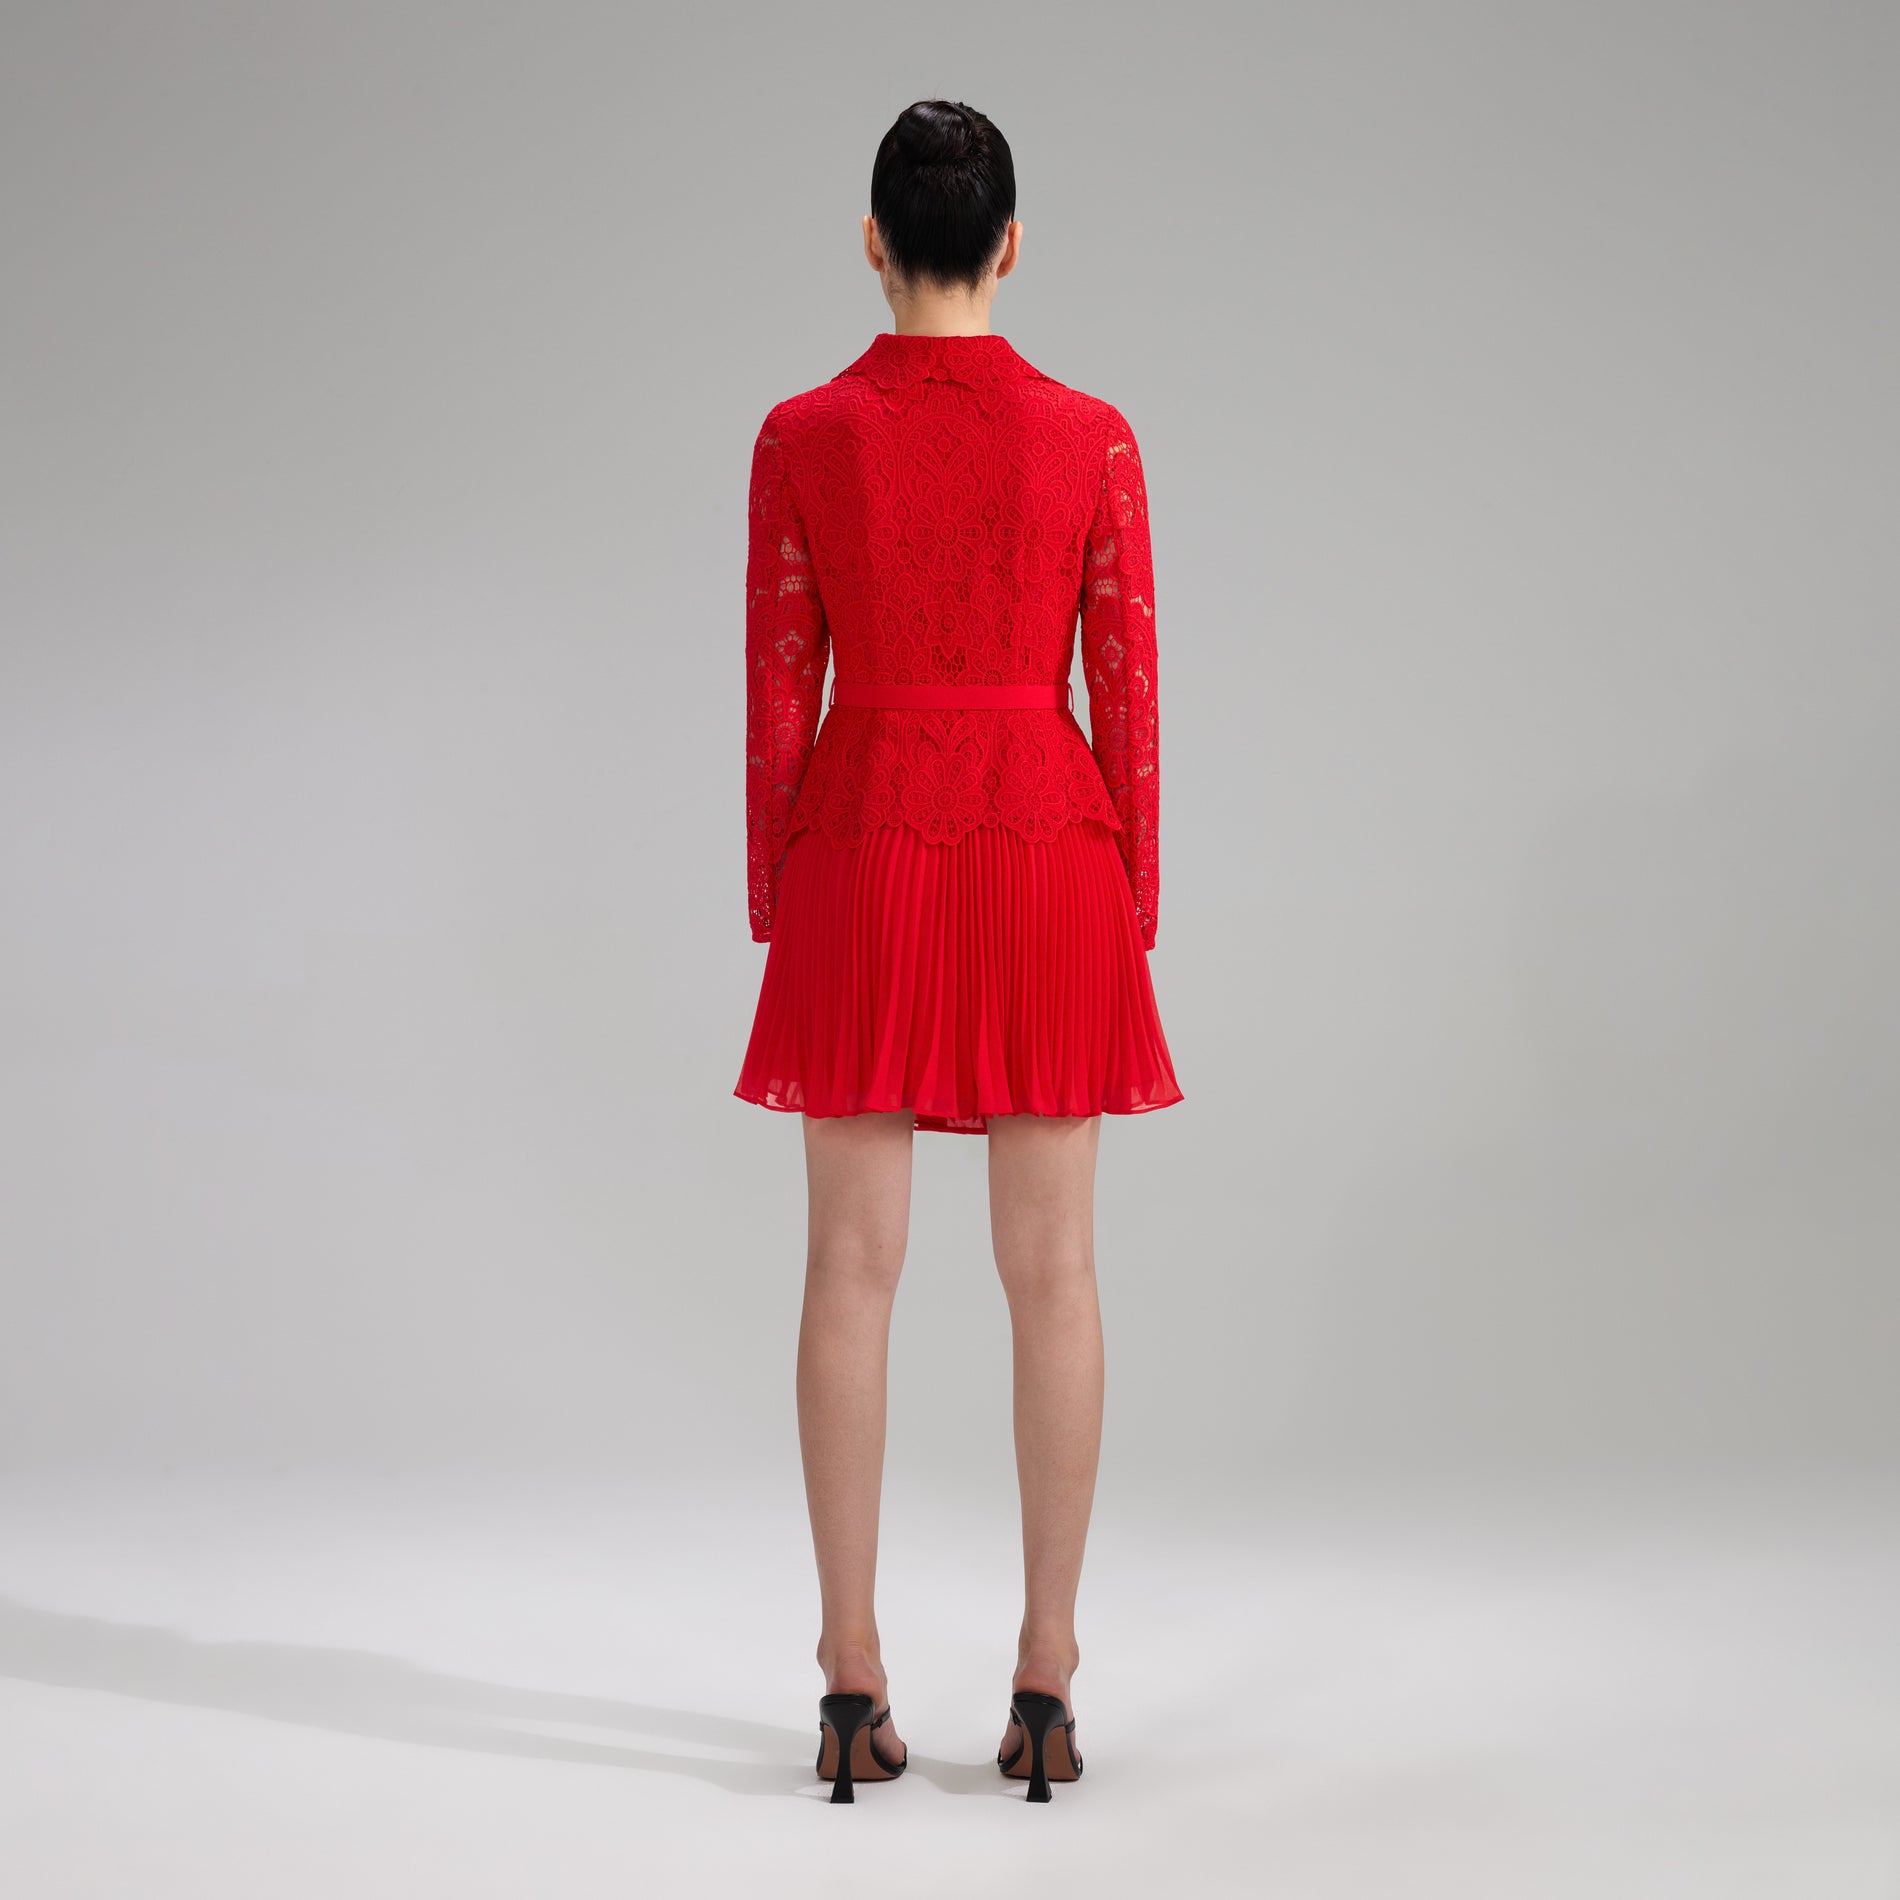 A woman wearing the Red Buttoned Guipure Lace Mini Dress